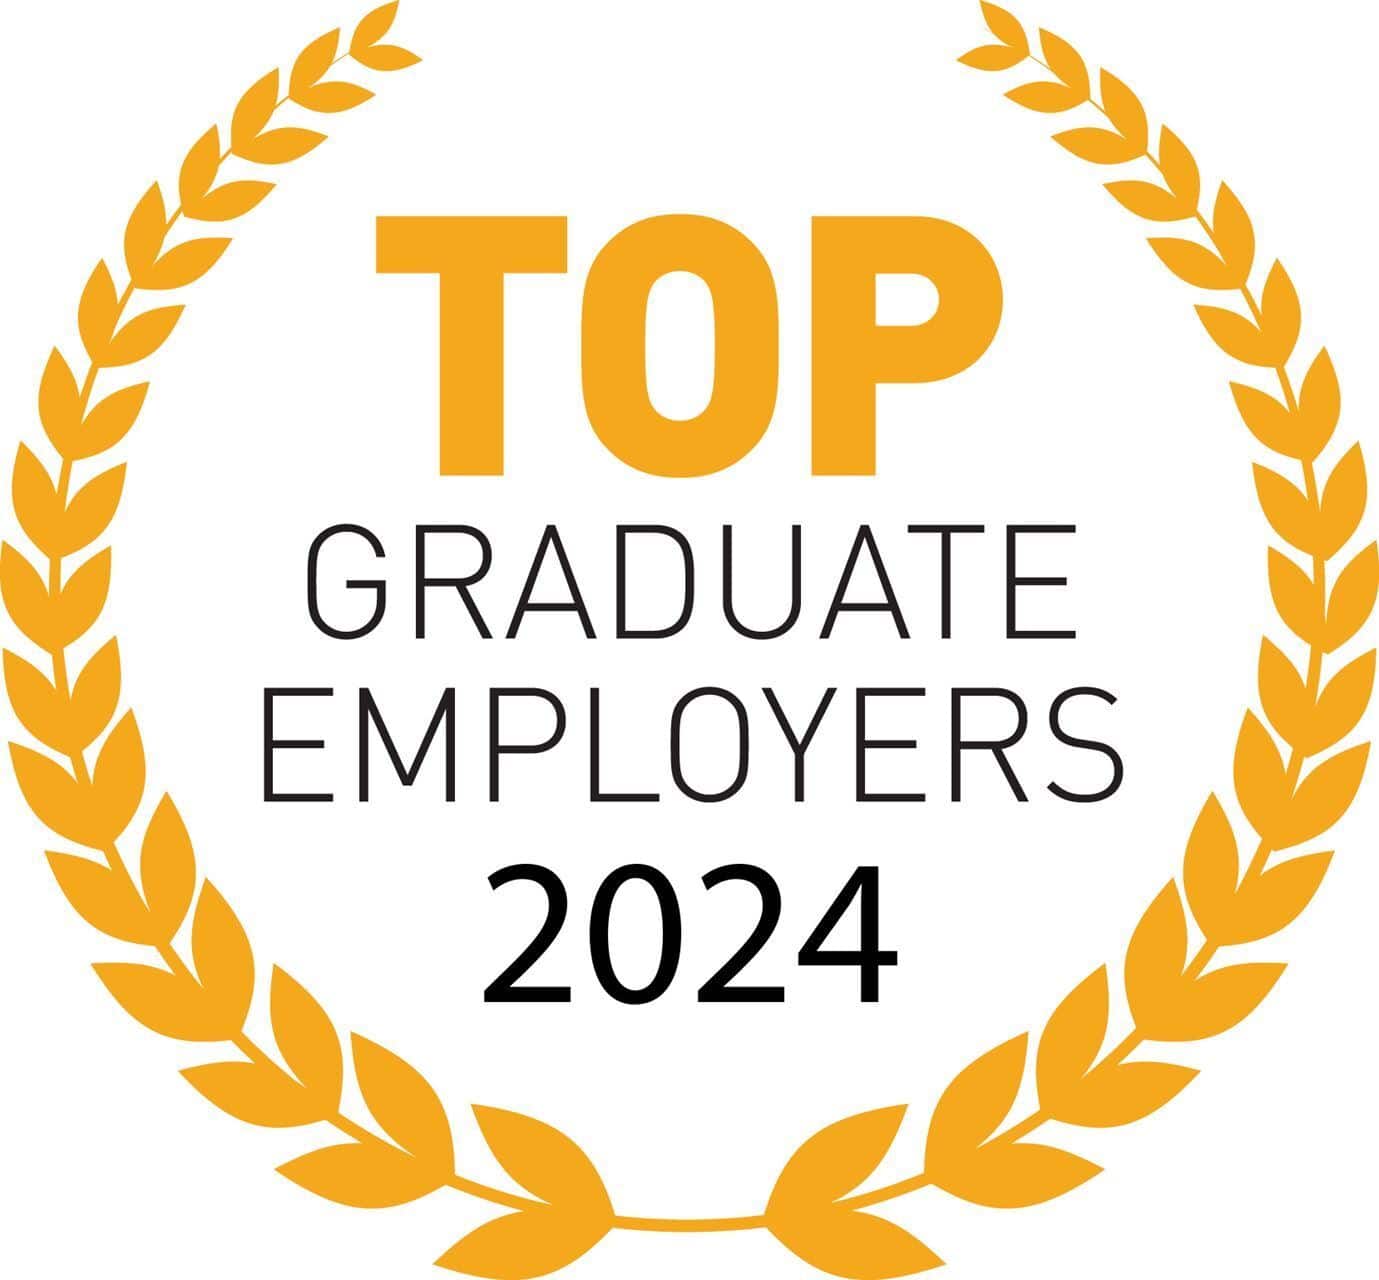 The AAGE Top Graduate Employer logo